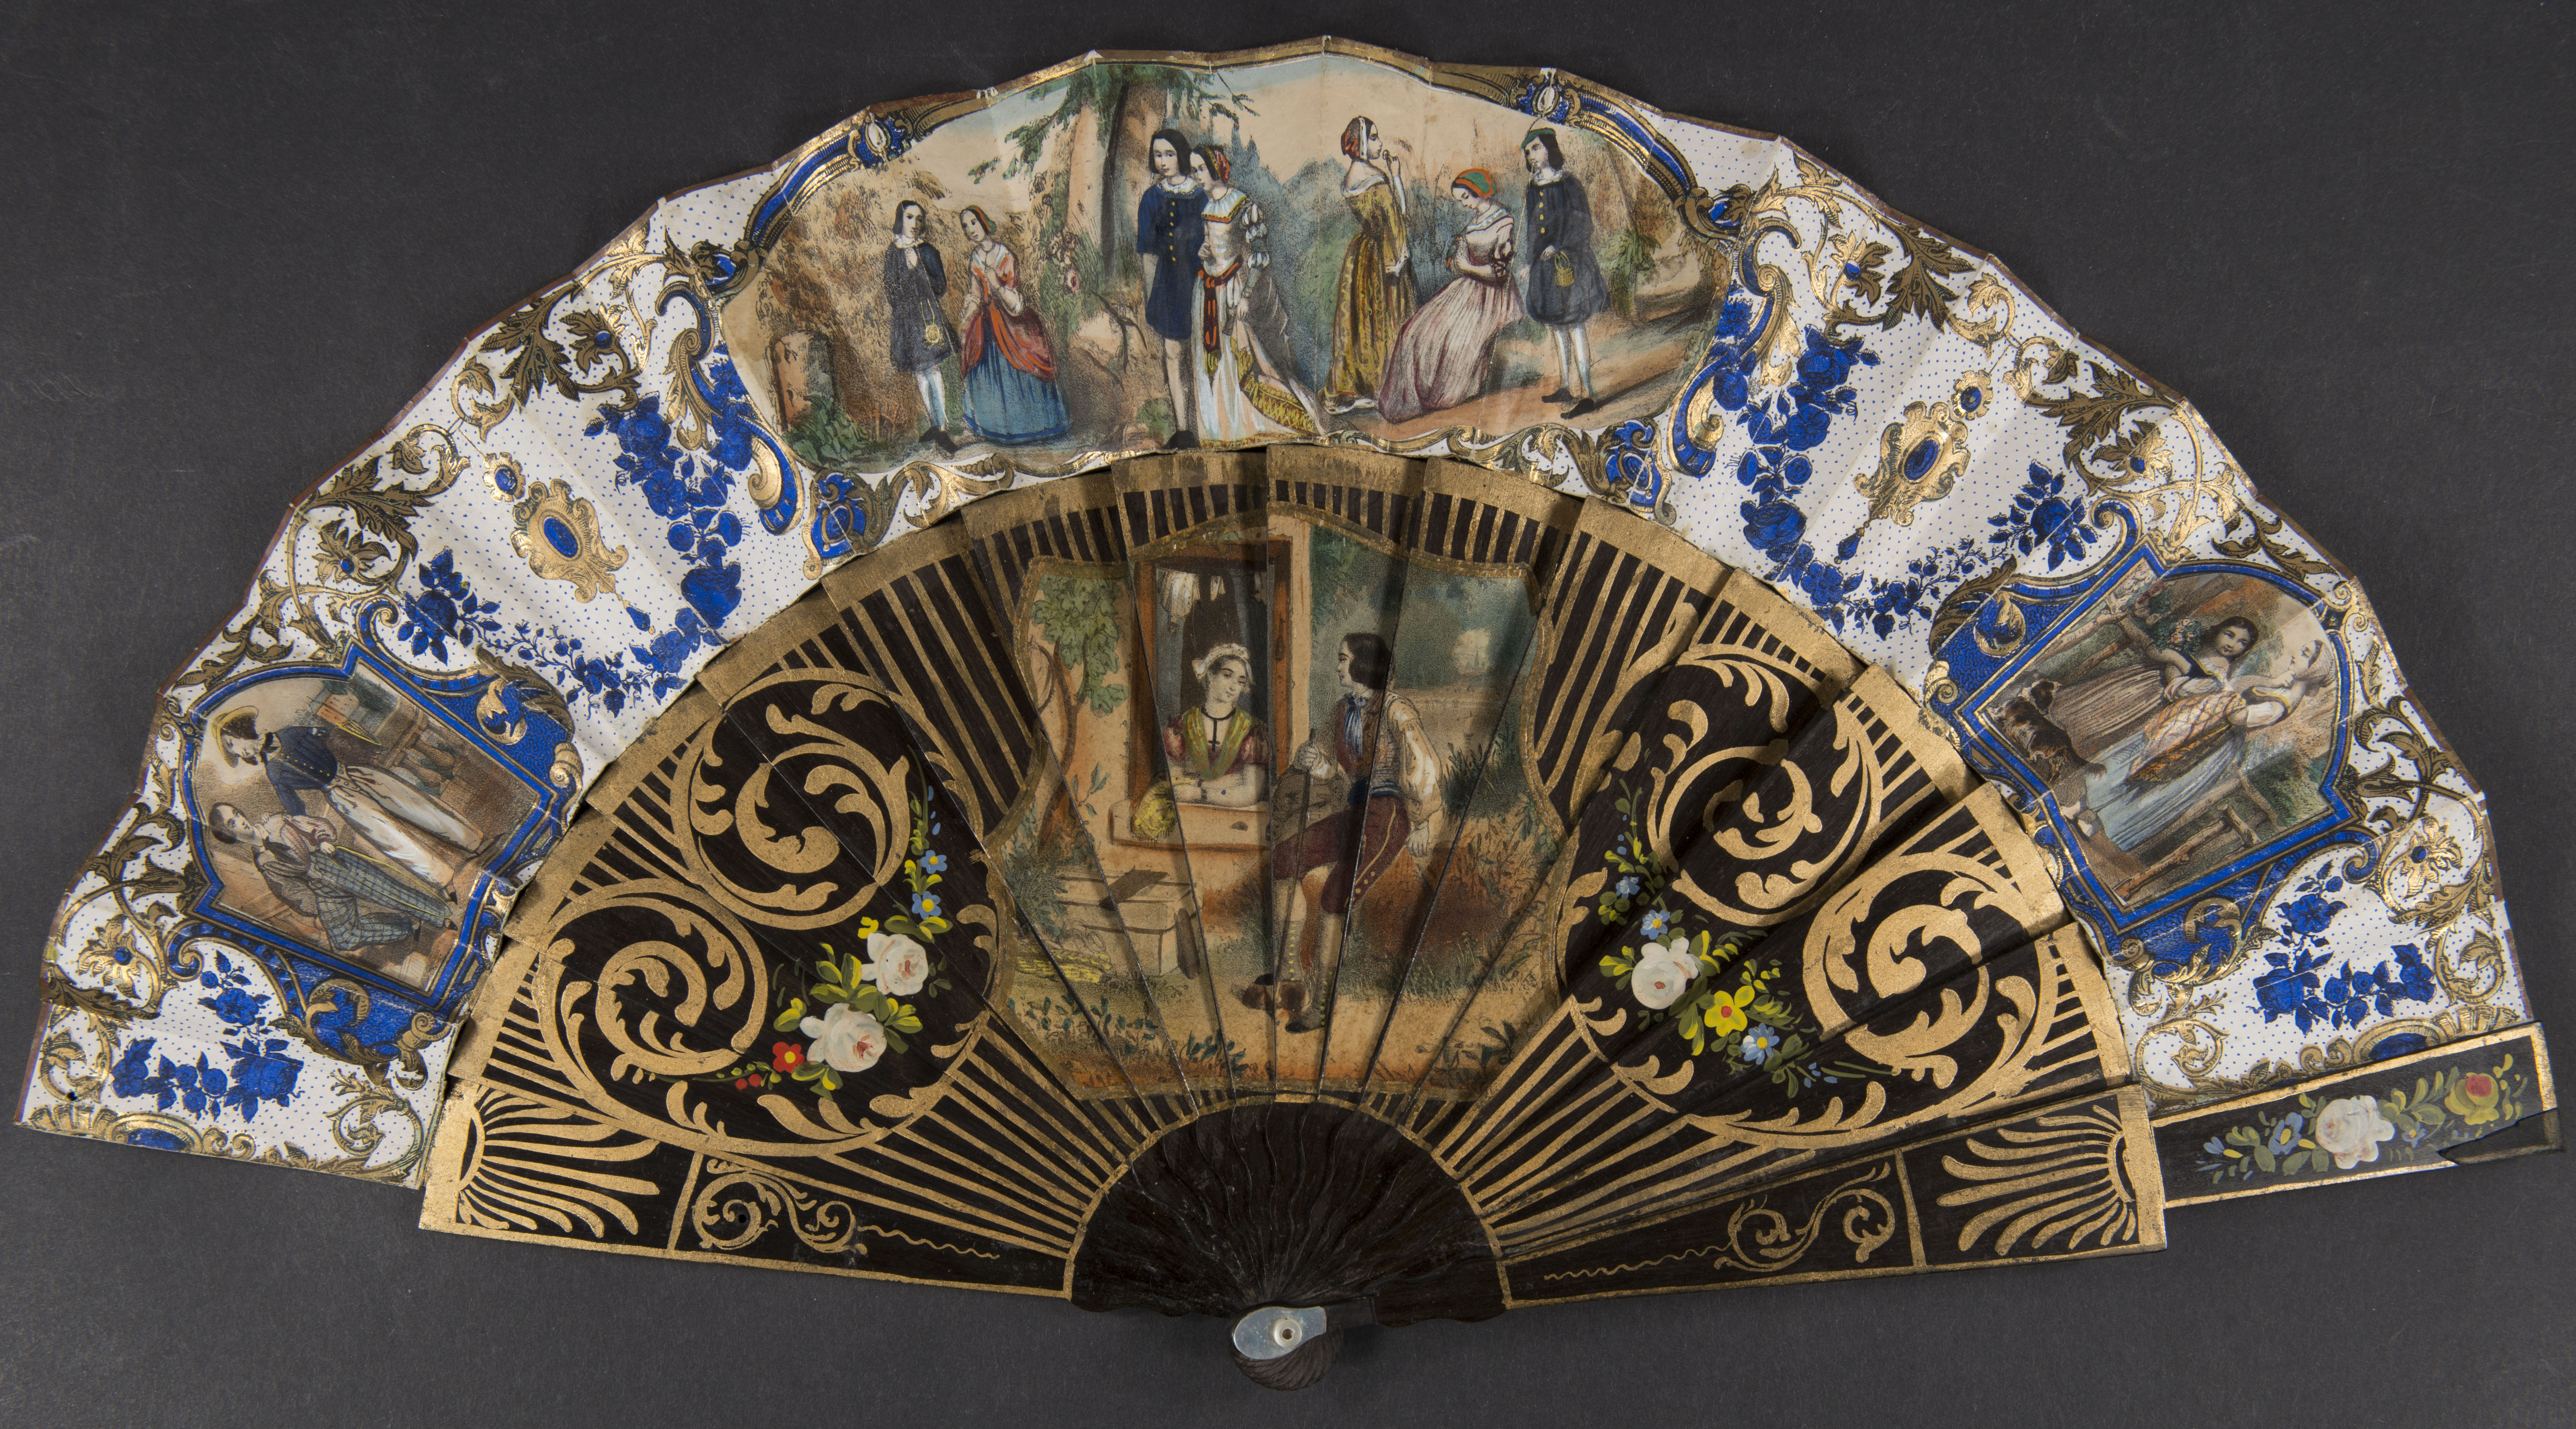 hand fan ornately decorated in blue and gold with illustrations of the upper class